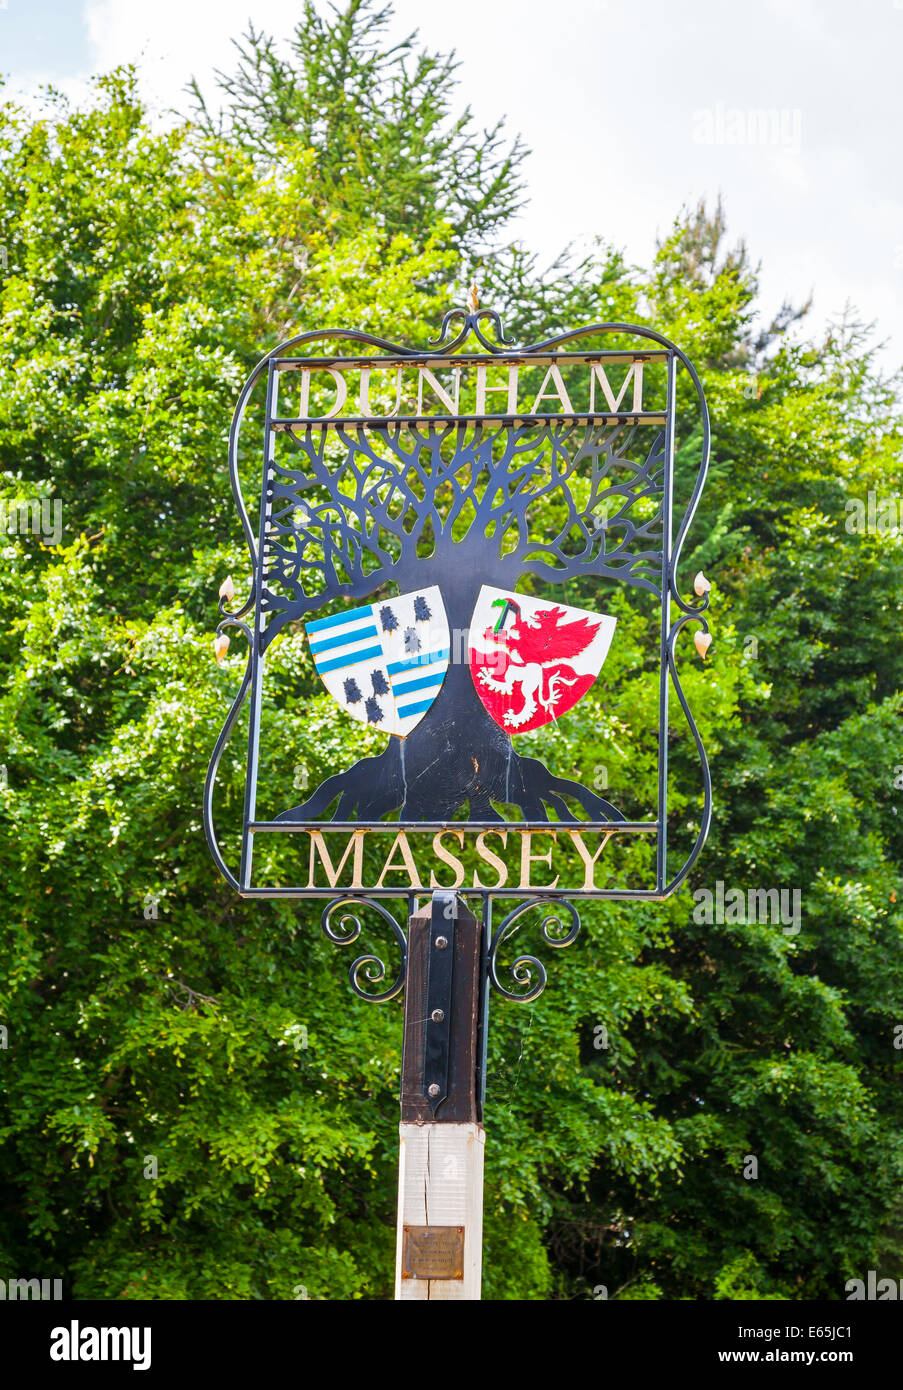 A metal sign post donated by the Womans Institute in 2000 at Dunham Massey Altrincham Greater Manchester Cheshire Stock Photo